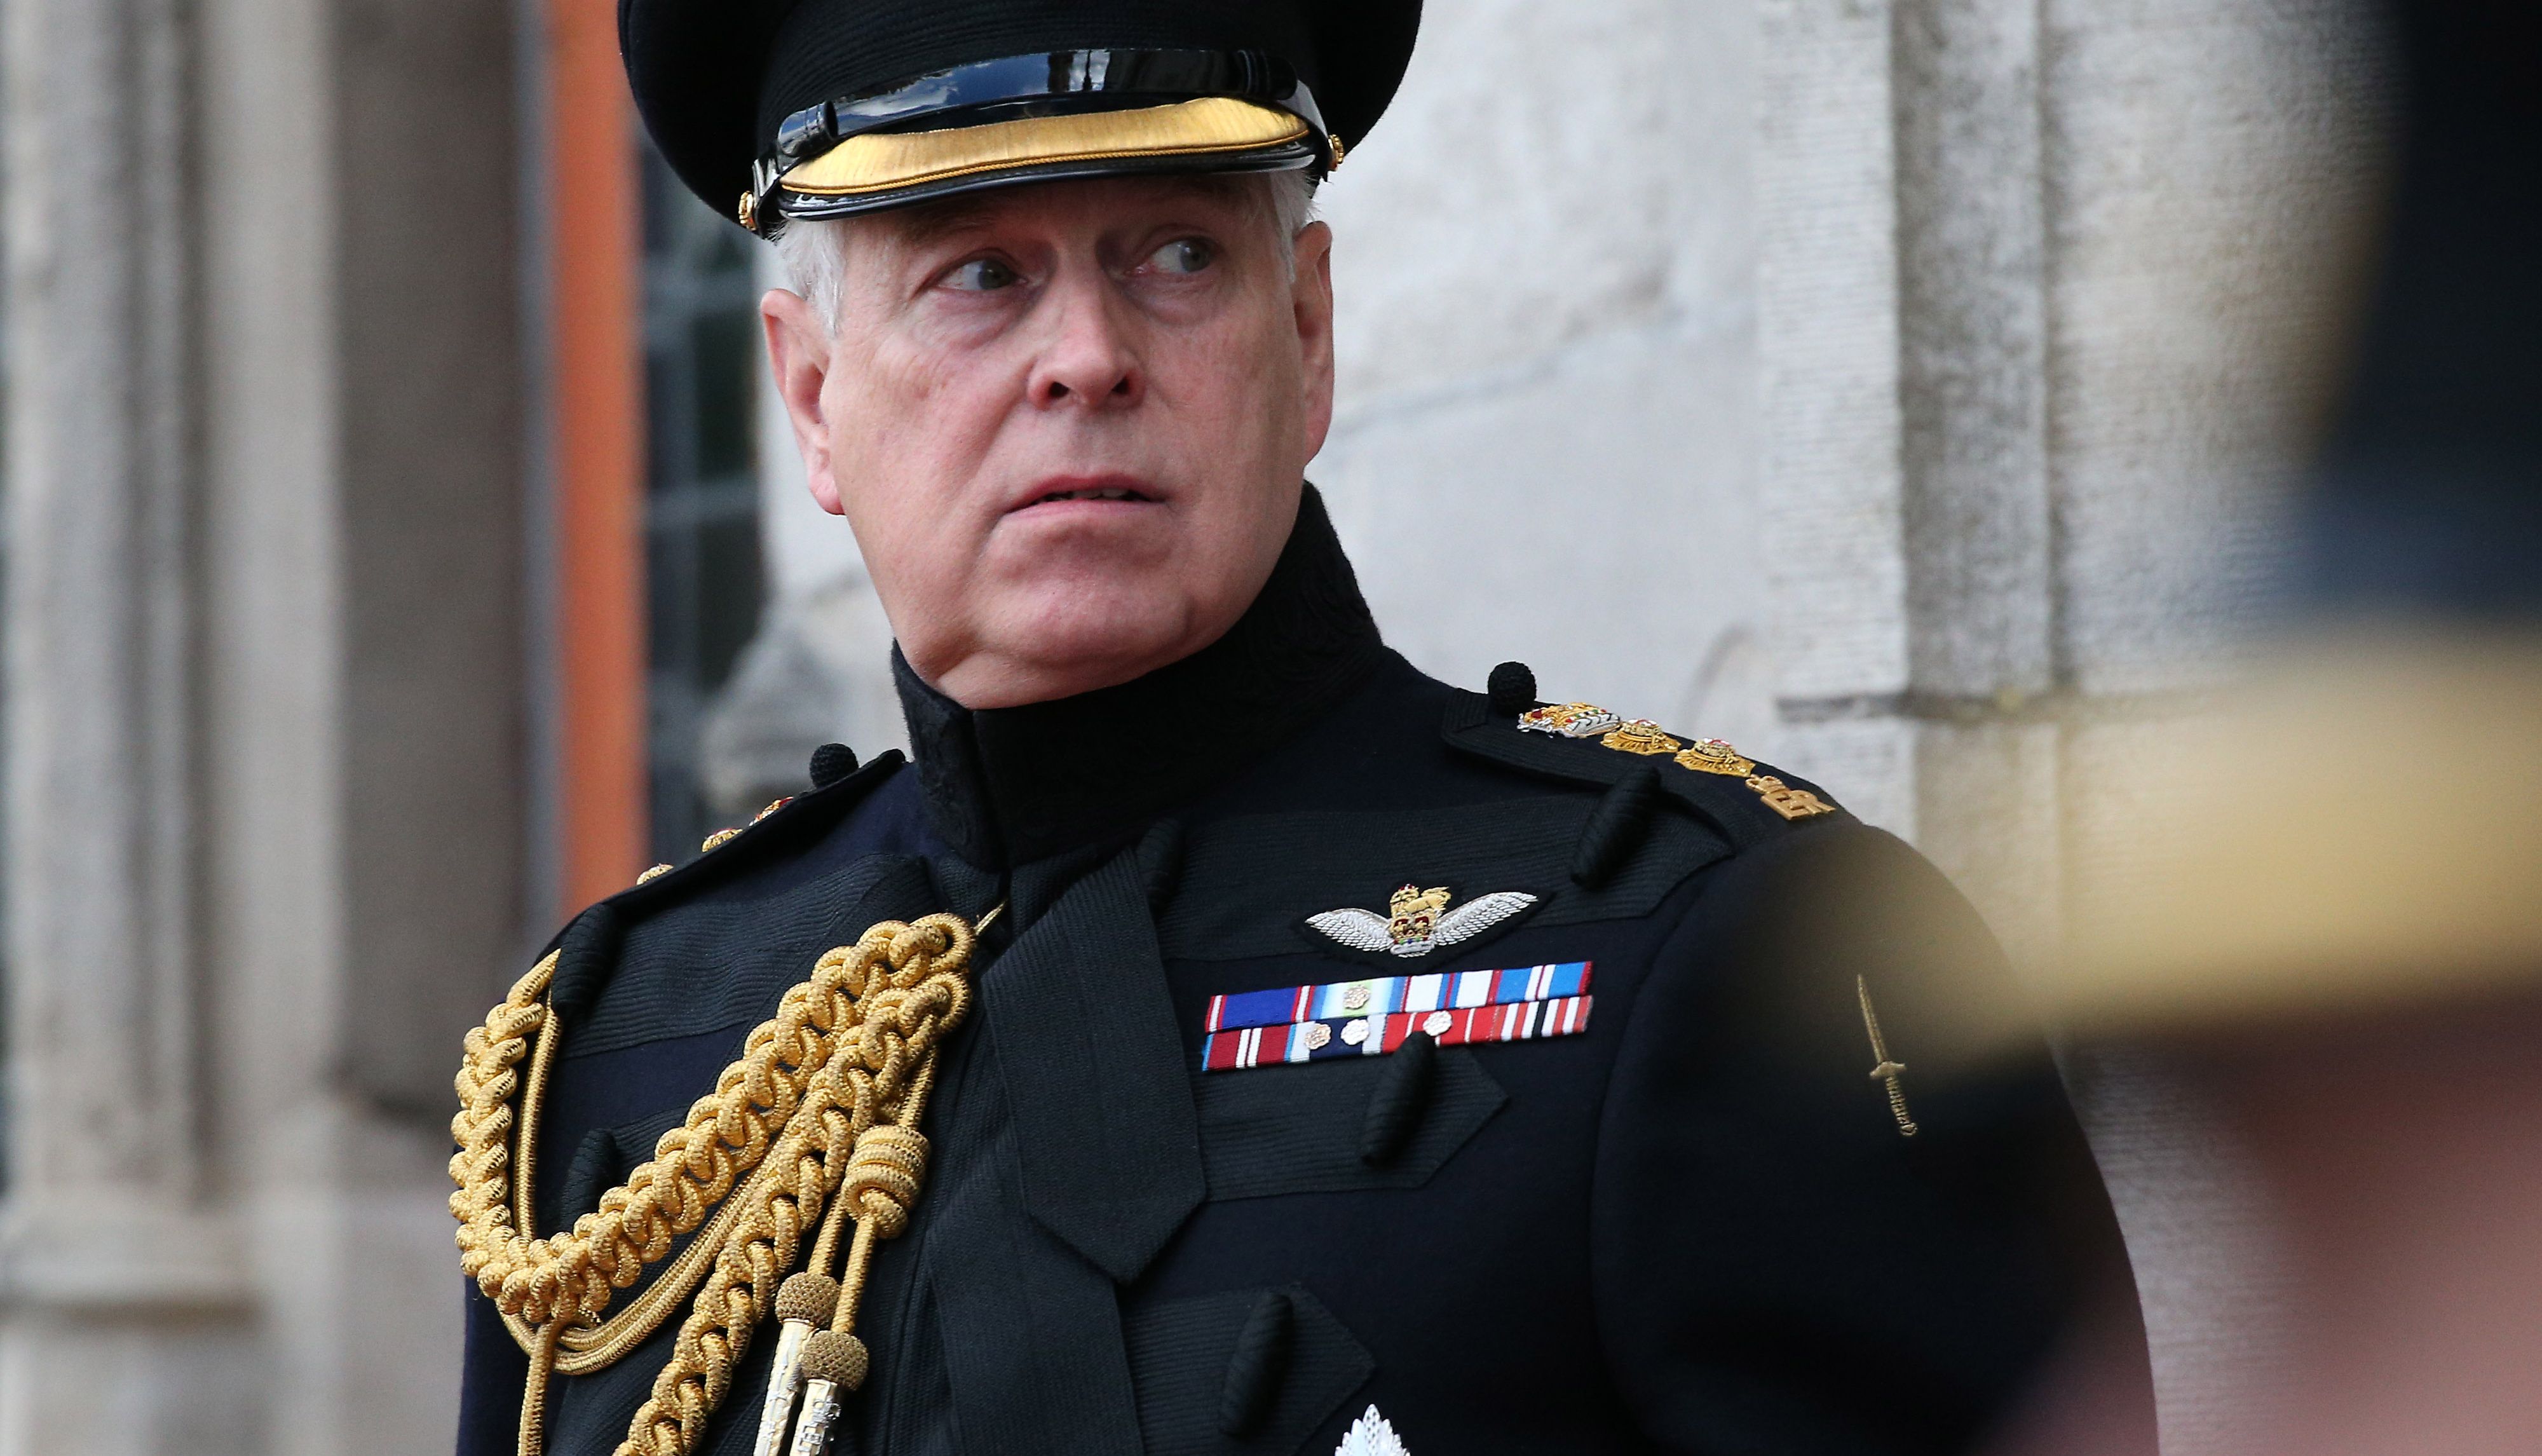 The Duke of York, in his role as colonel of the Grenadier Guards, at a memorial in Bruges.